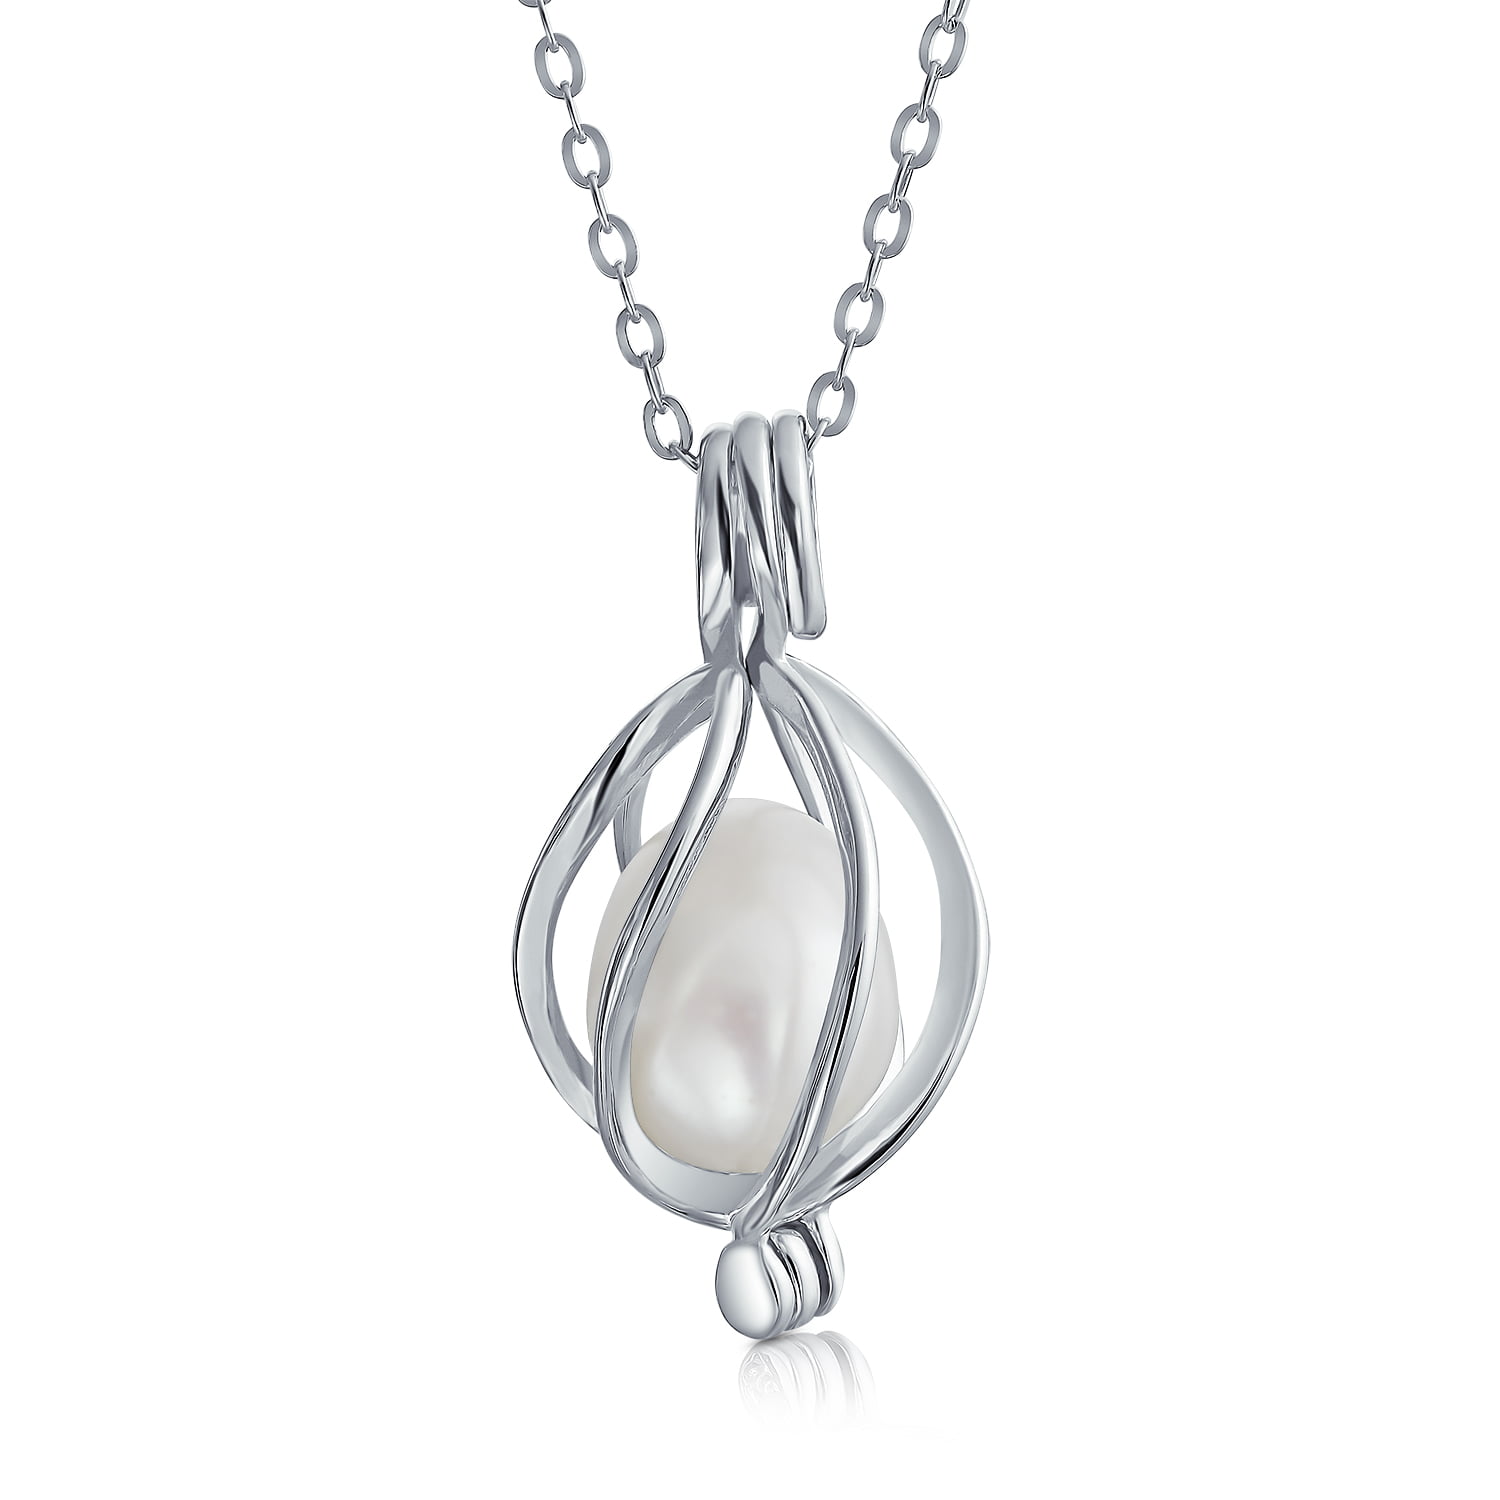 1Pc Enamel Colorful Pearl Pendant Cage Pendant Silver Plated Necklace For Gift